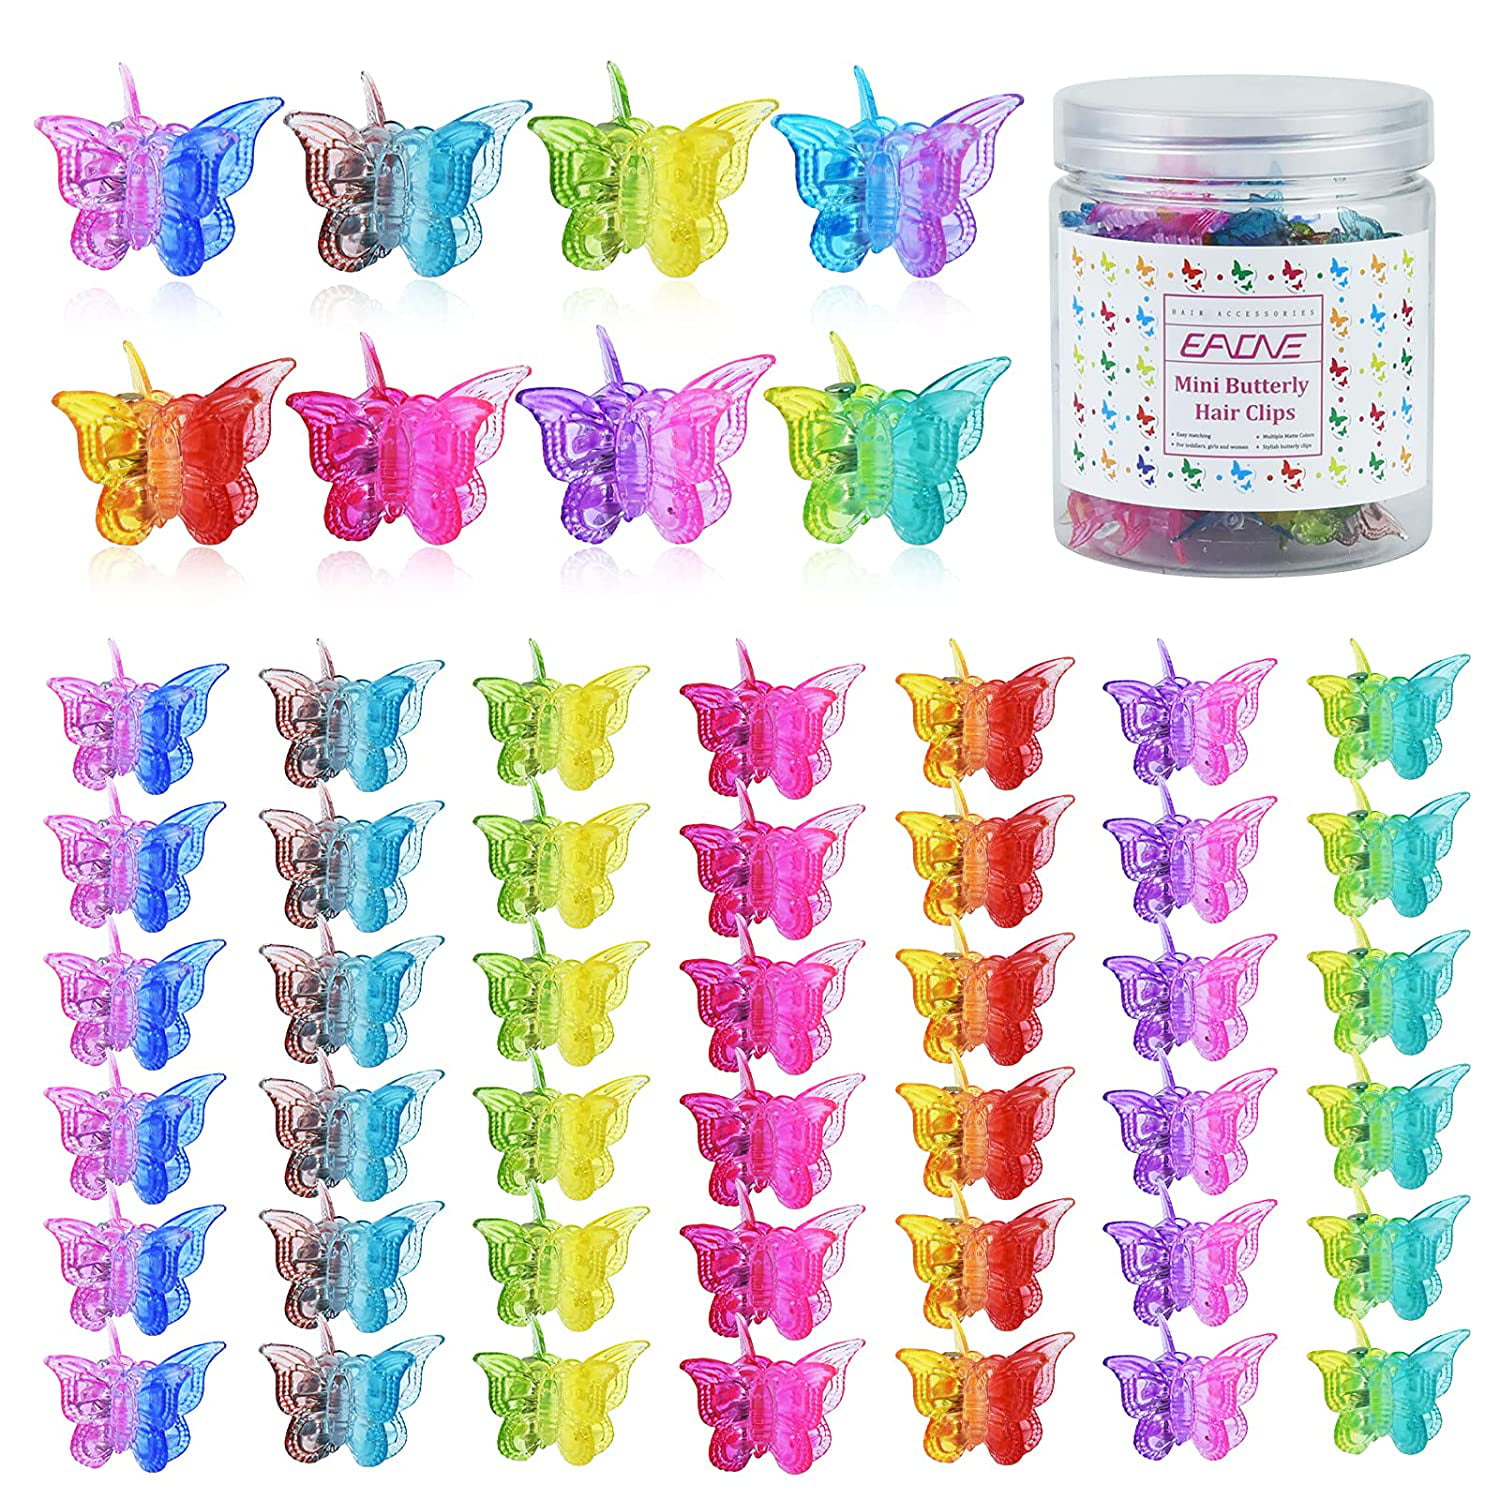 Butterfly Clips 50Pcs, IUIT Pastel Butterfly Hair Clips Cute Mini Small Hair  Claw Clips Hair Aesthetic Accessories for 90s 2000s Girls Women's Hair with  Box Package, Gradient Transparency Colors | Walmart Canada